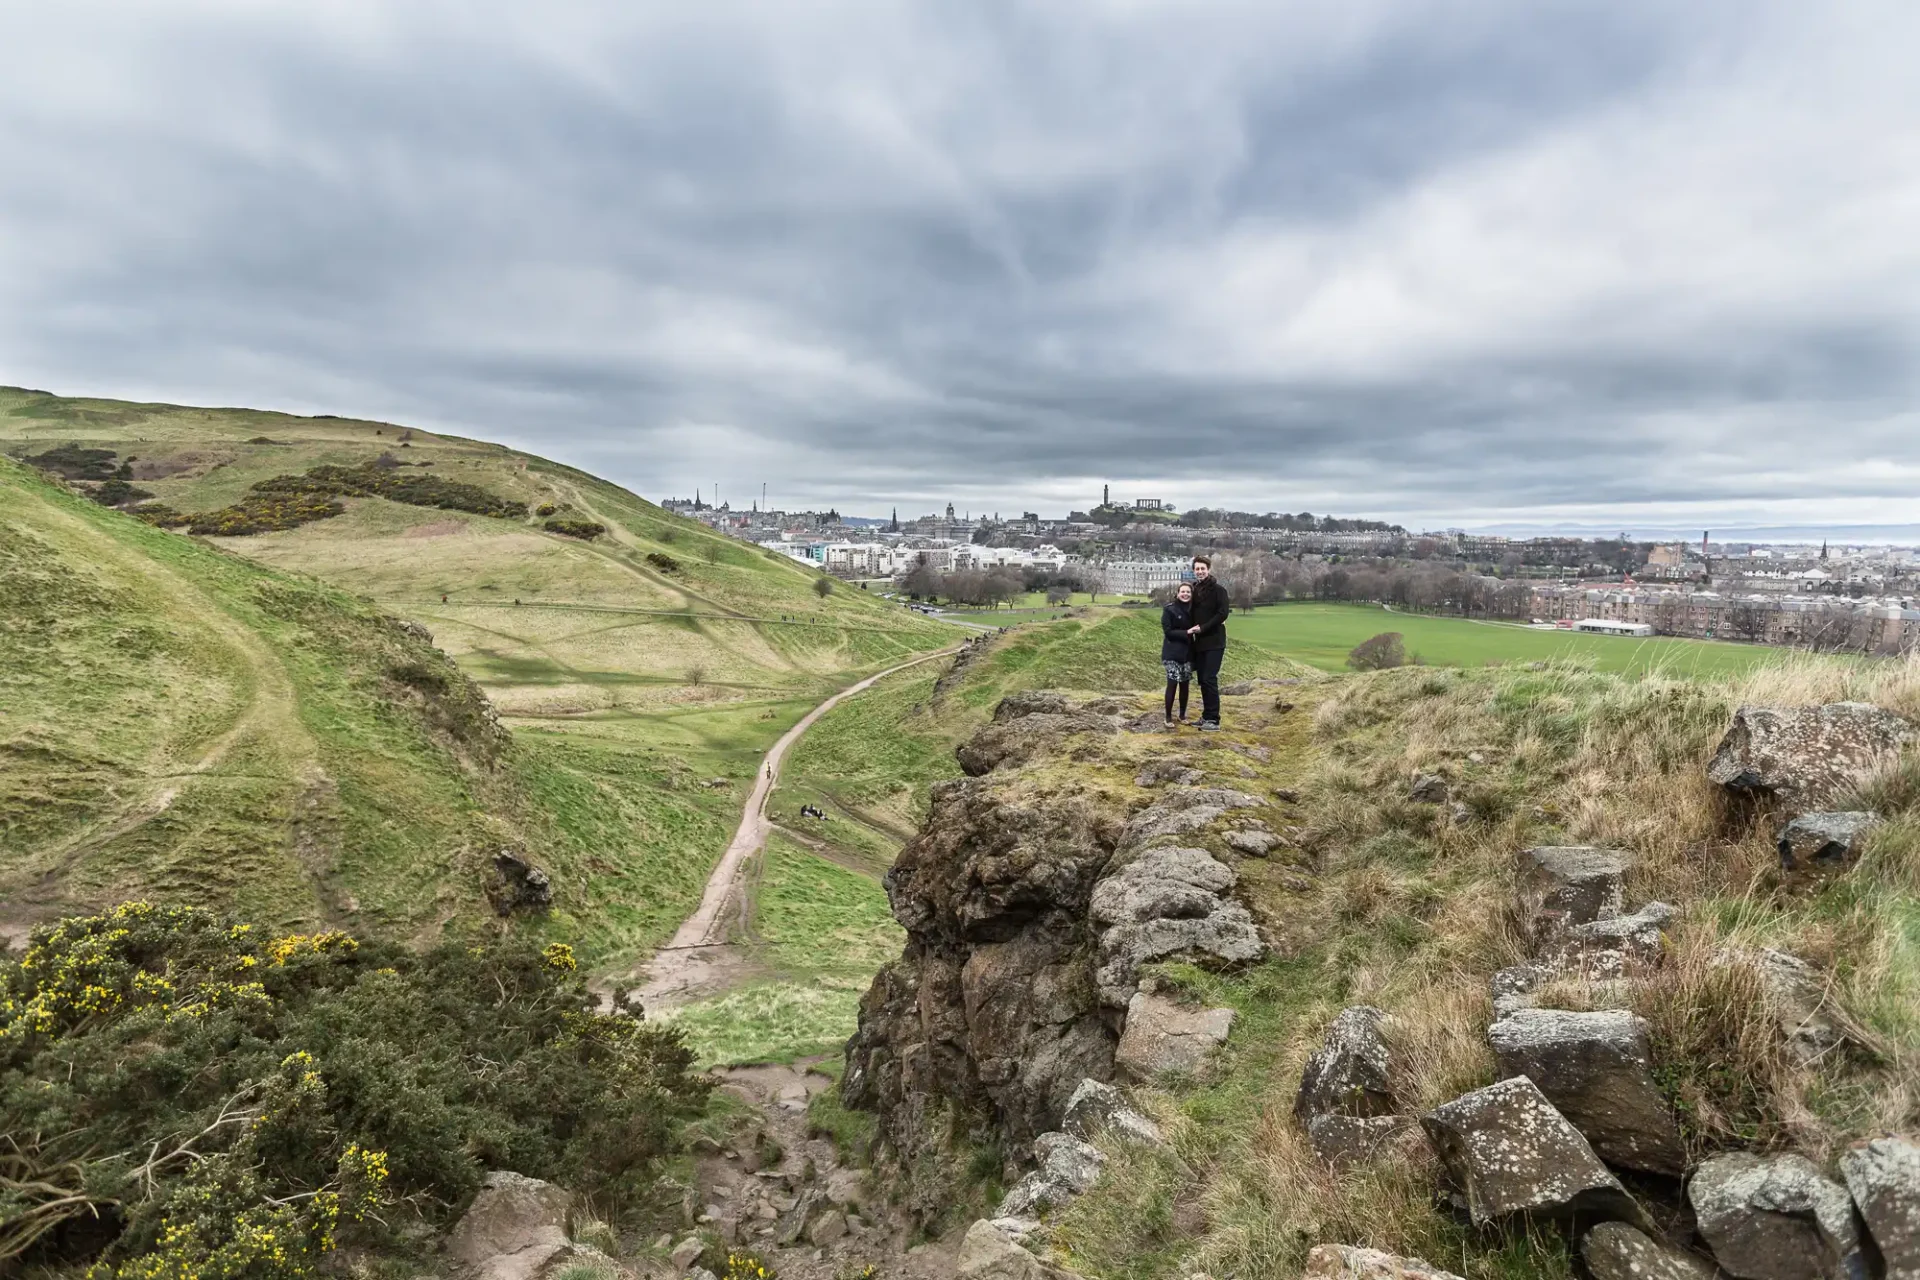 pre-wedding photoshoot at Arthur's Seat - Jon and Mandy: Two people stand on a rocky outcrop overlooking a vast grassy landscape with a distant city skyline under a cloudy sky.